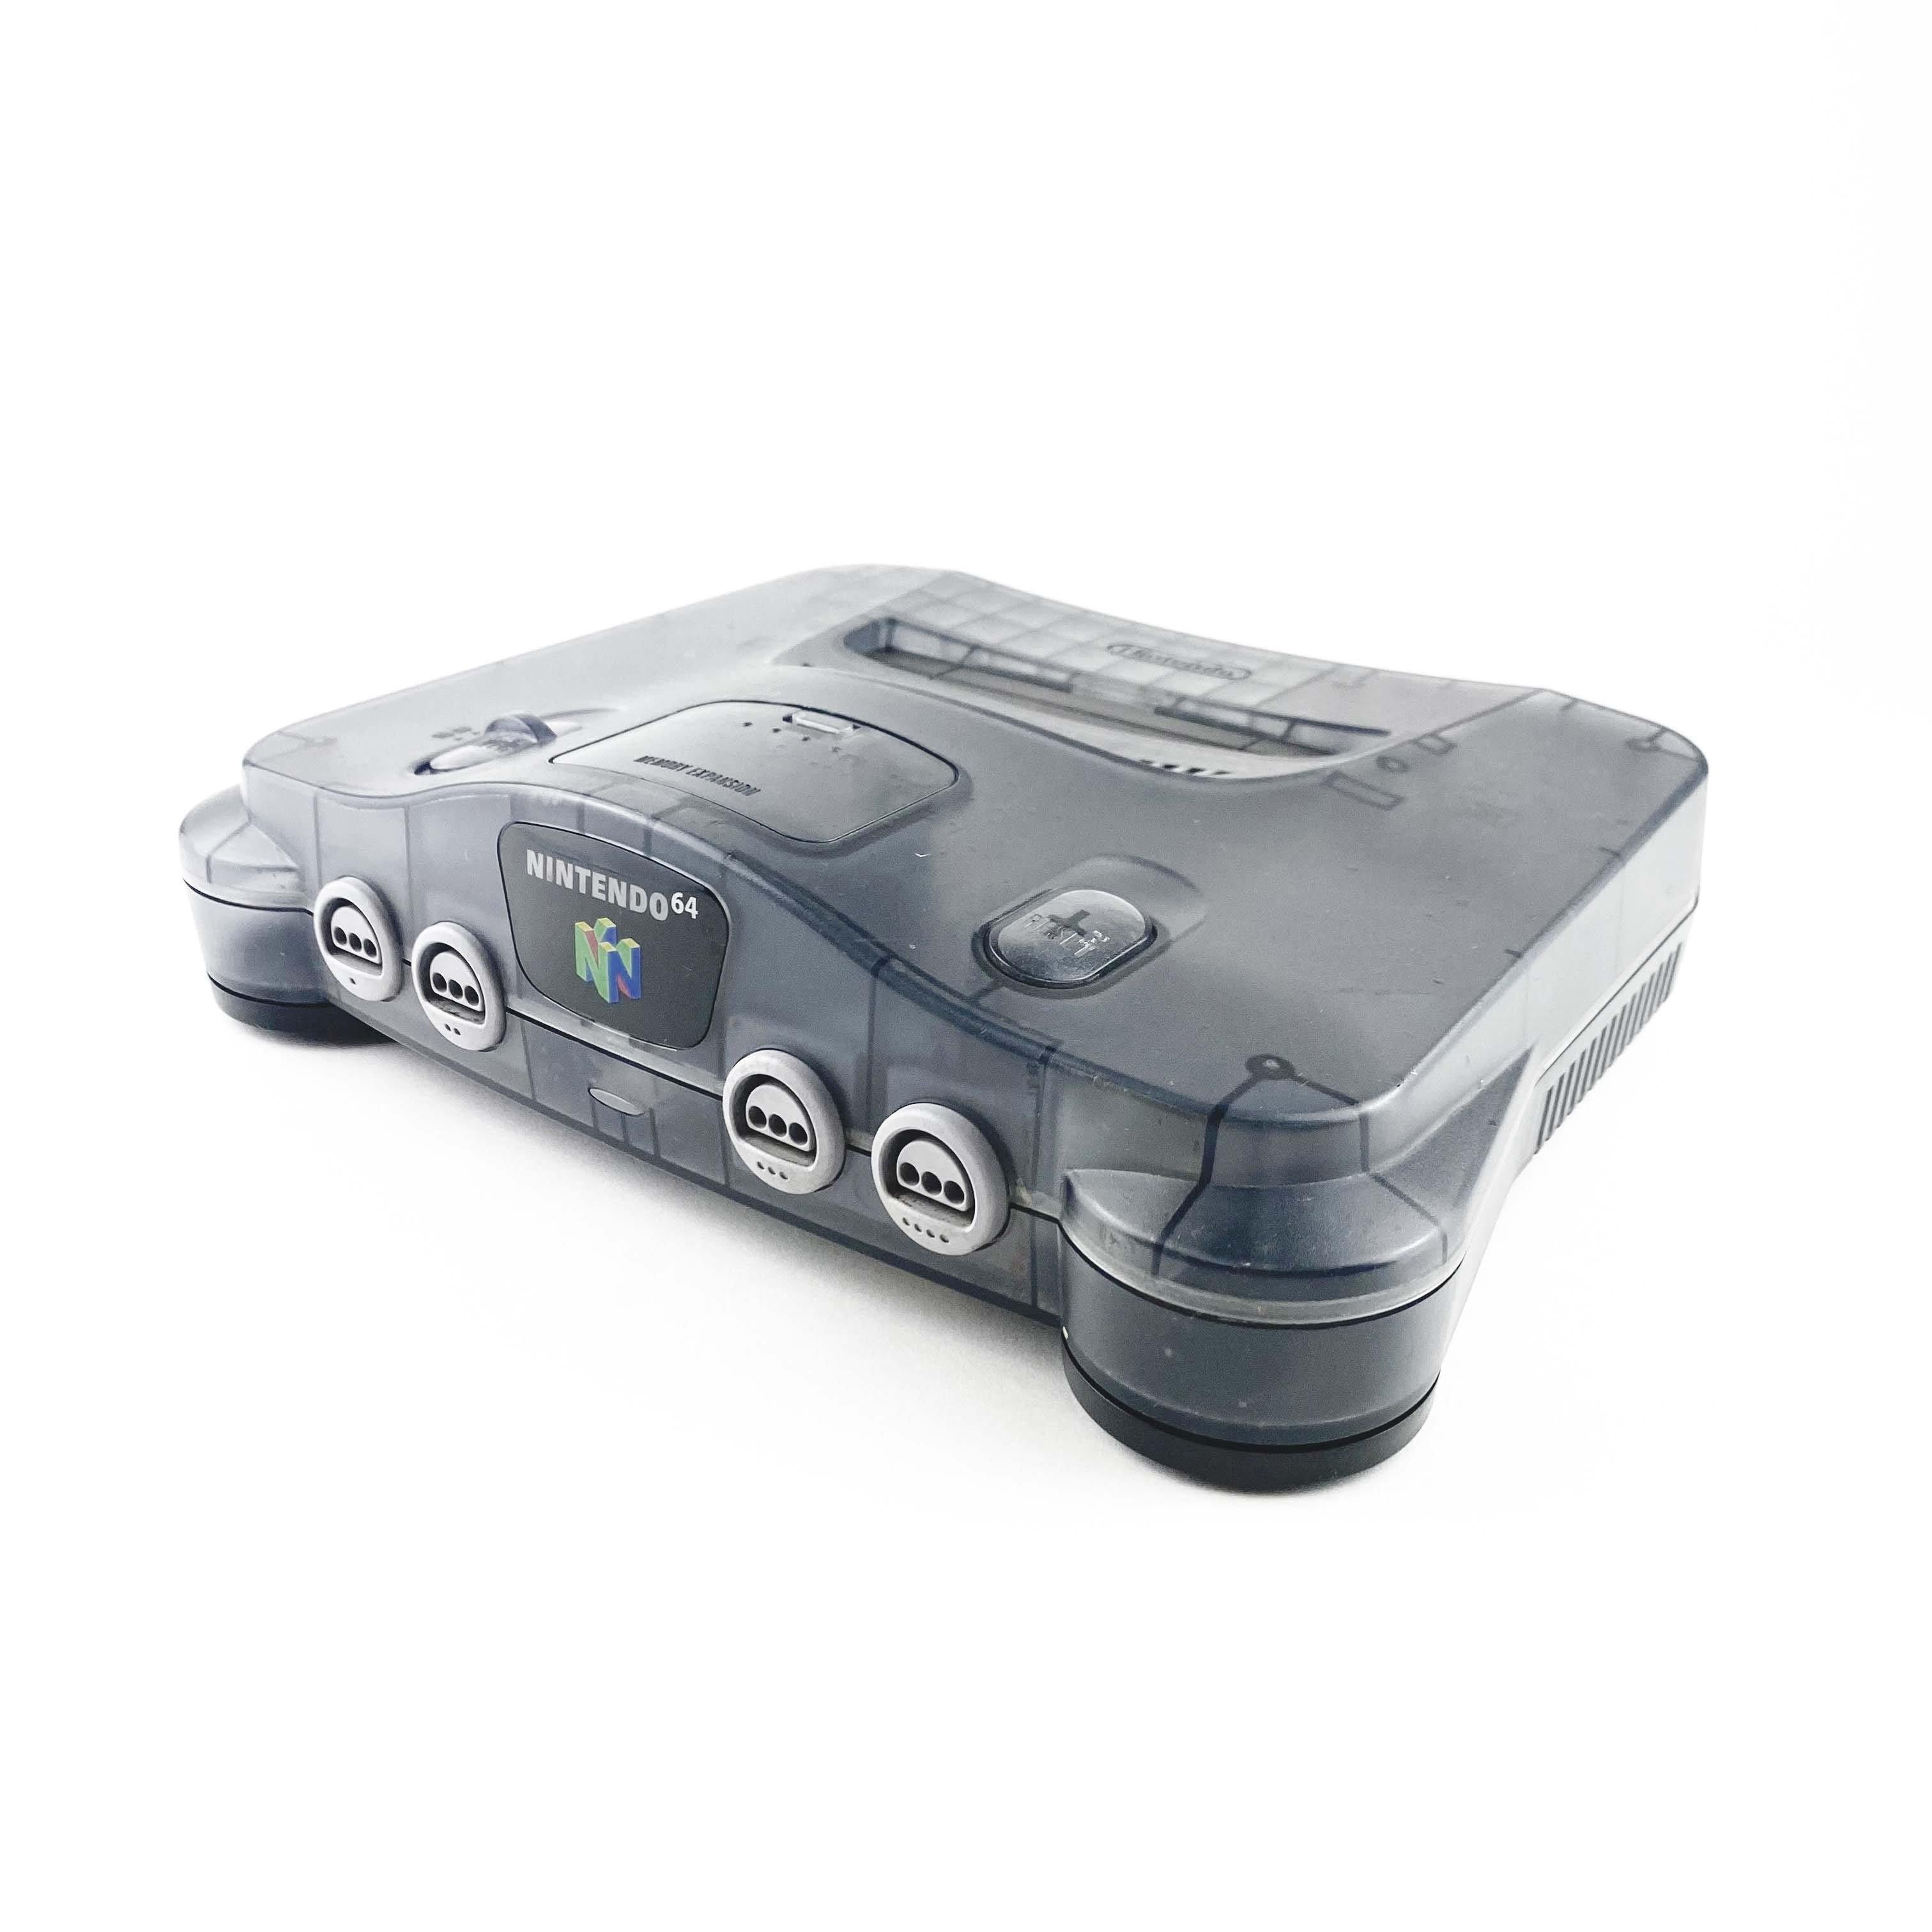 Nintendo N64 Clear Smoke Console Only (NUS-001)